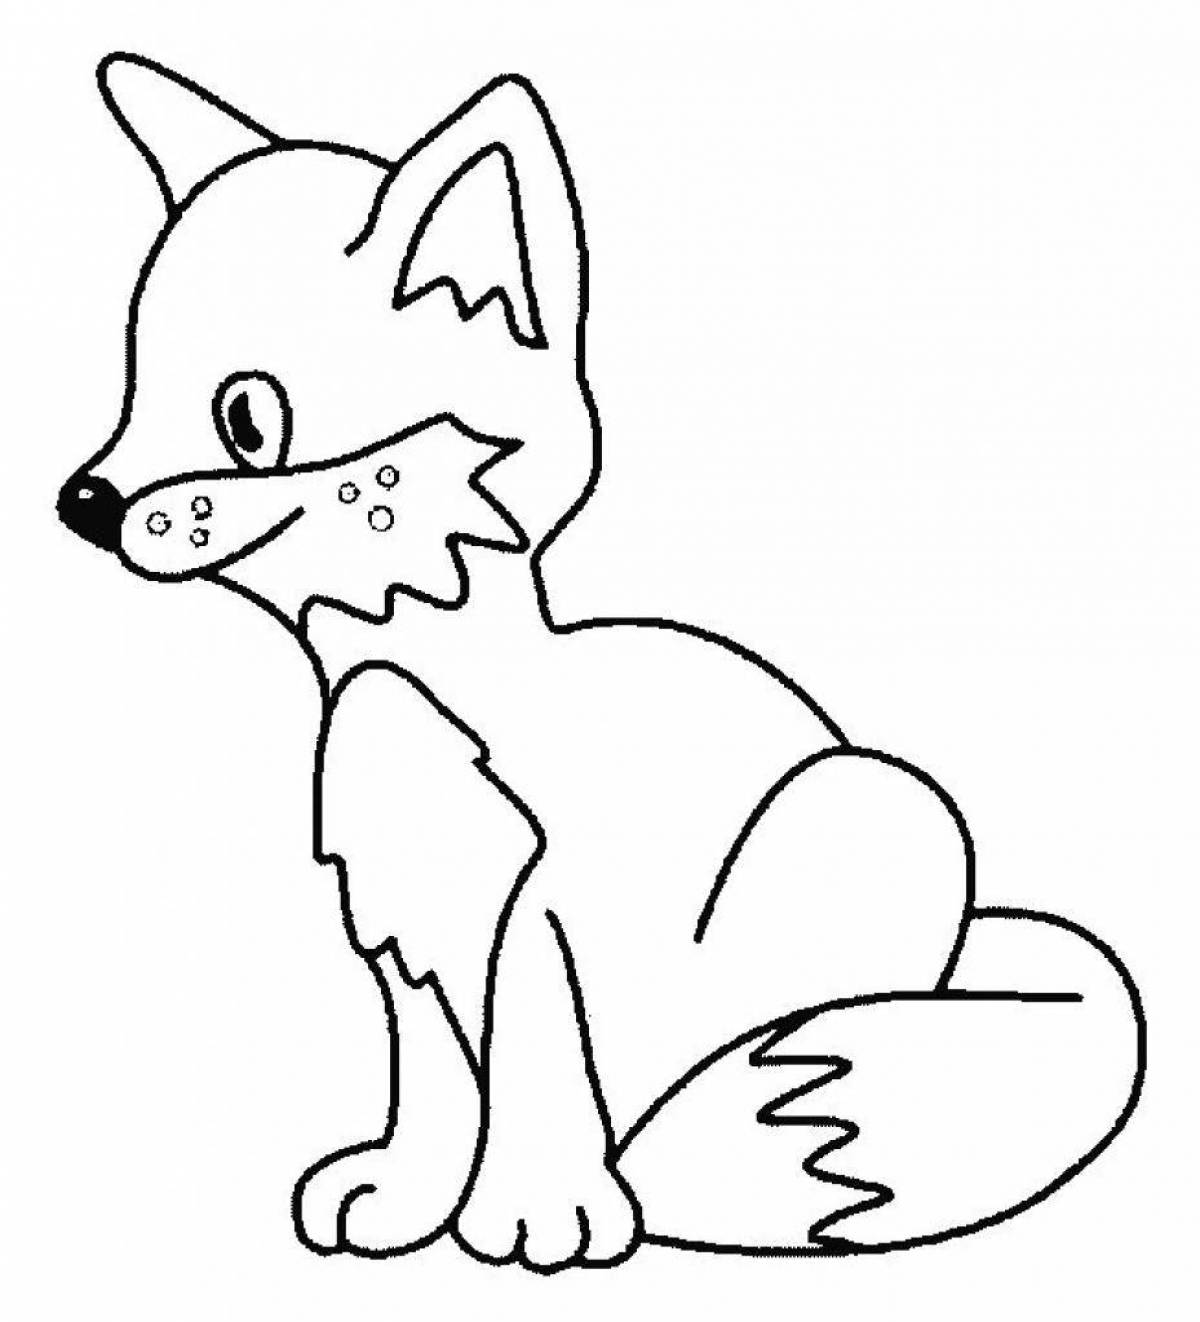 Snuggly coloring page baby fox baby